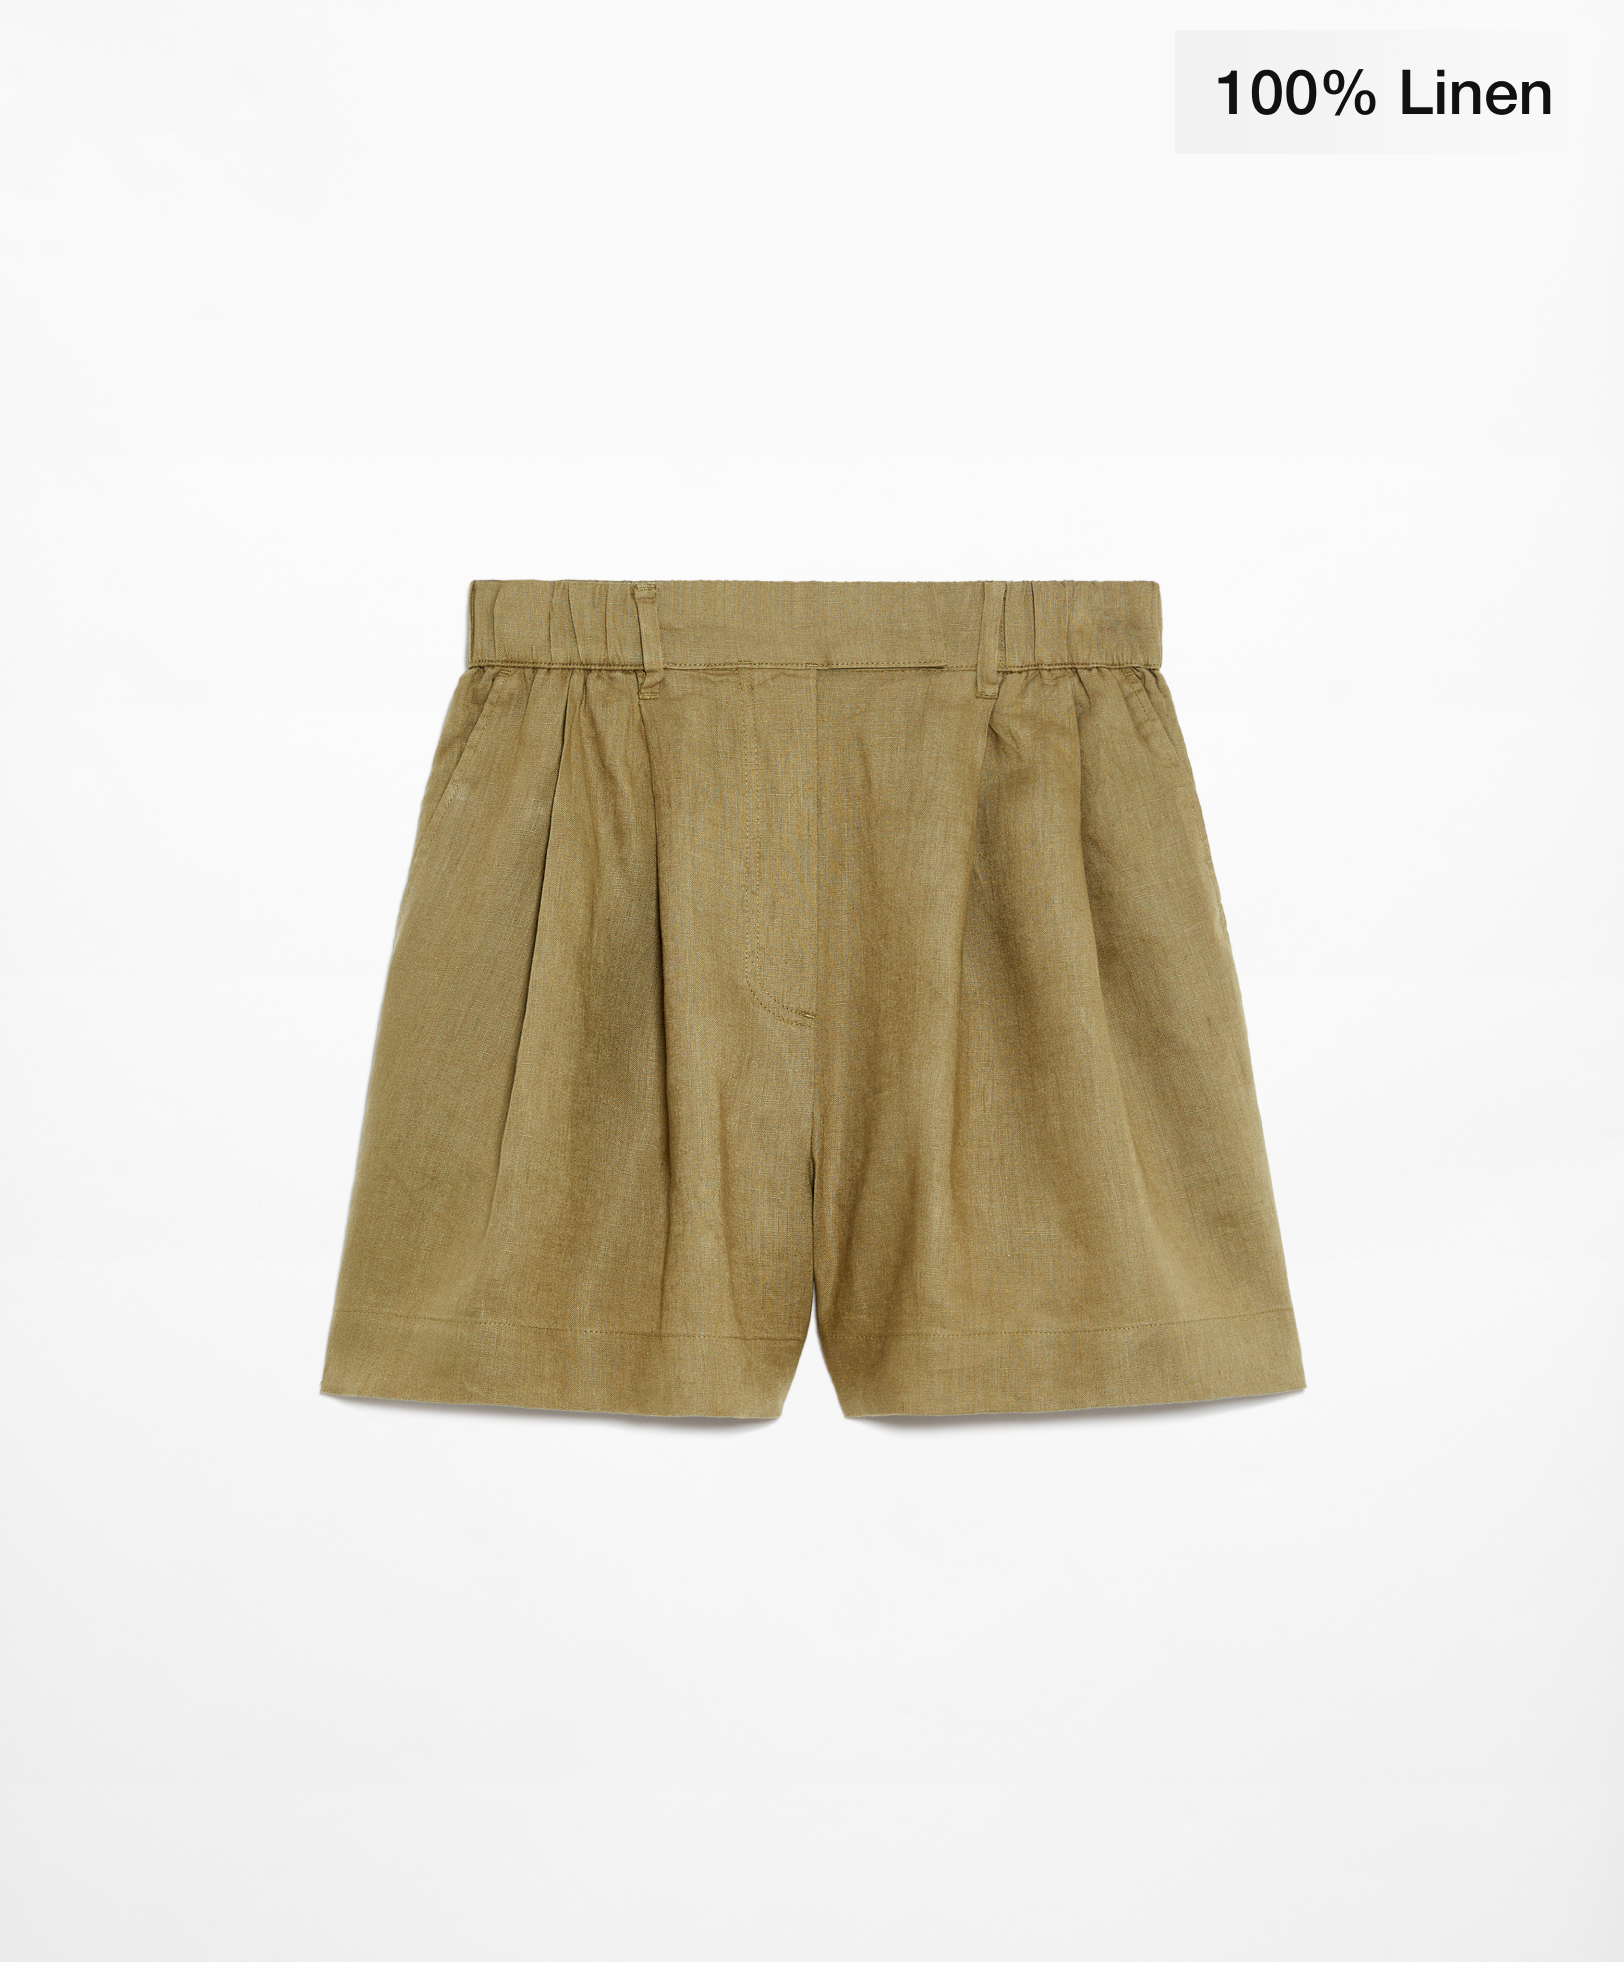 100% linen tailored-fit shorts